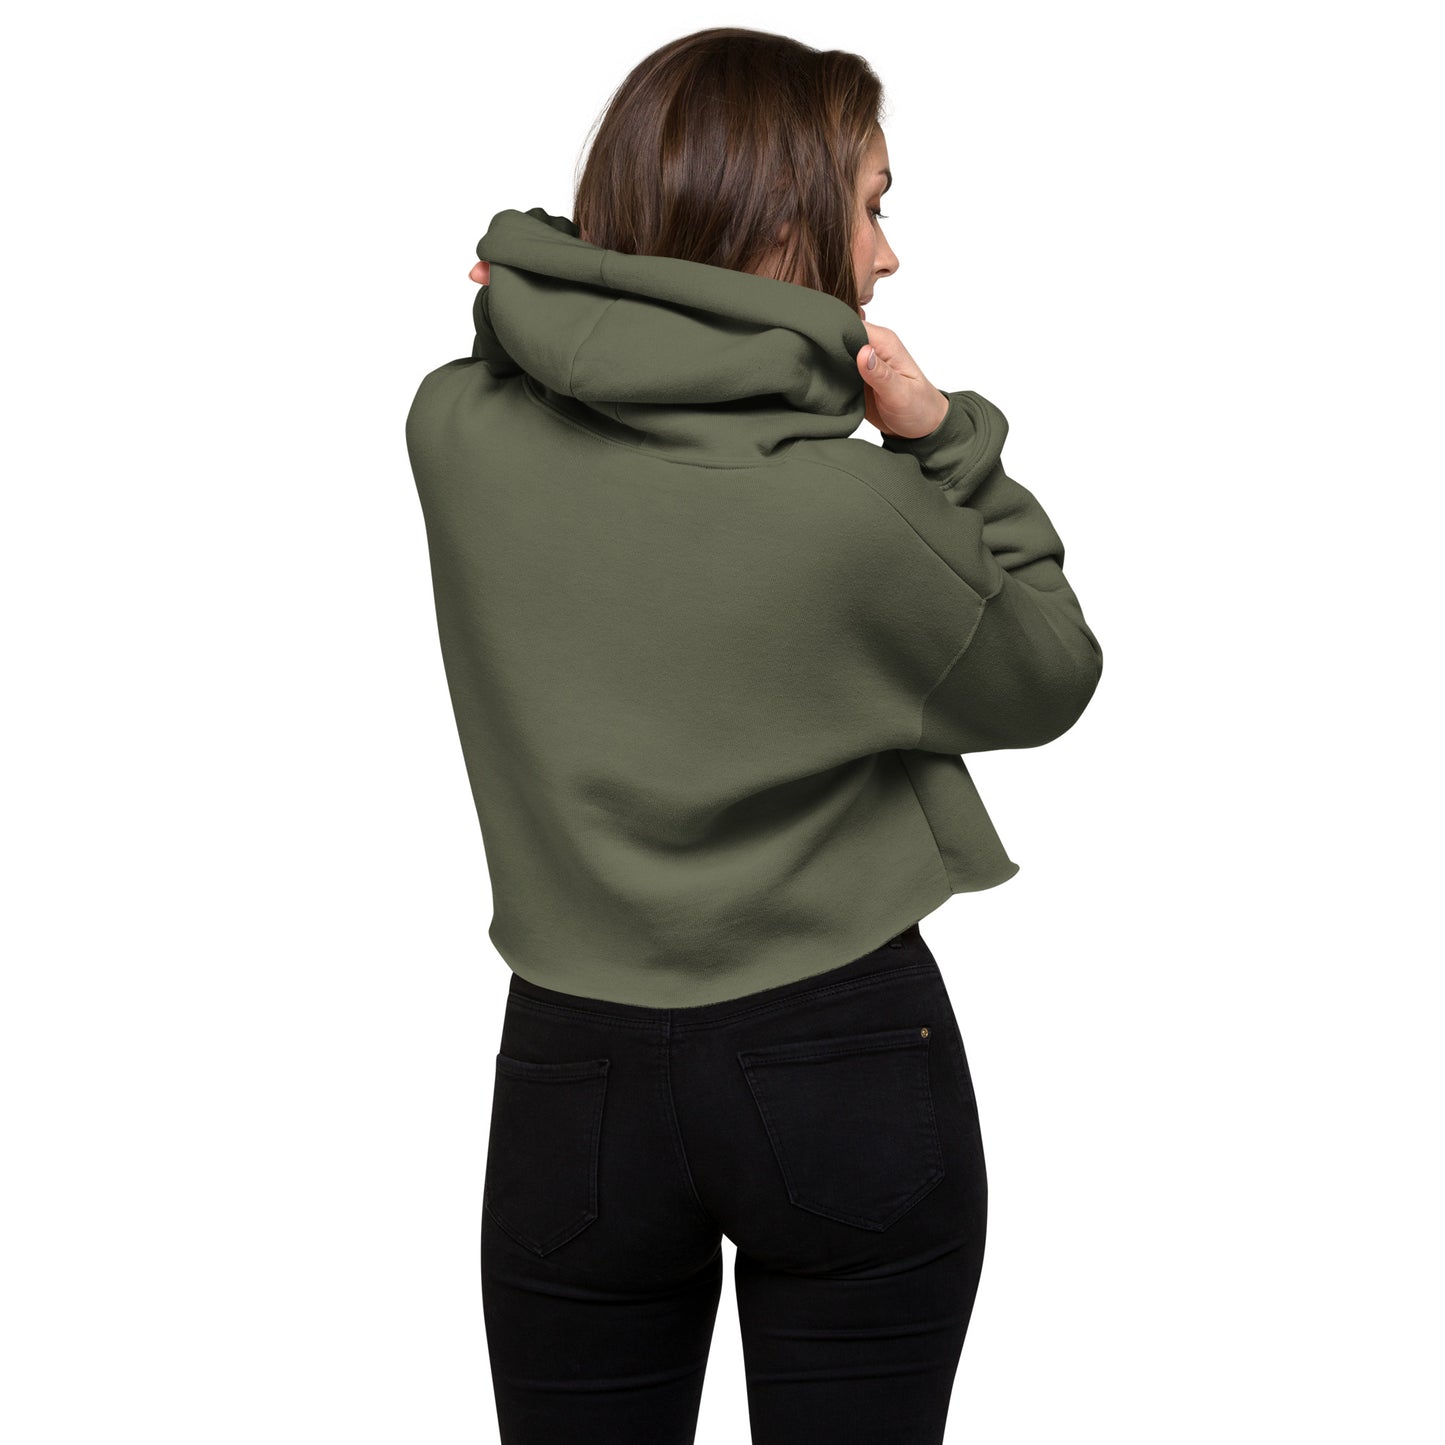 Keys to the City Halligan Firefighter Women's Crop Hoodie, Army Green sweater.